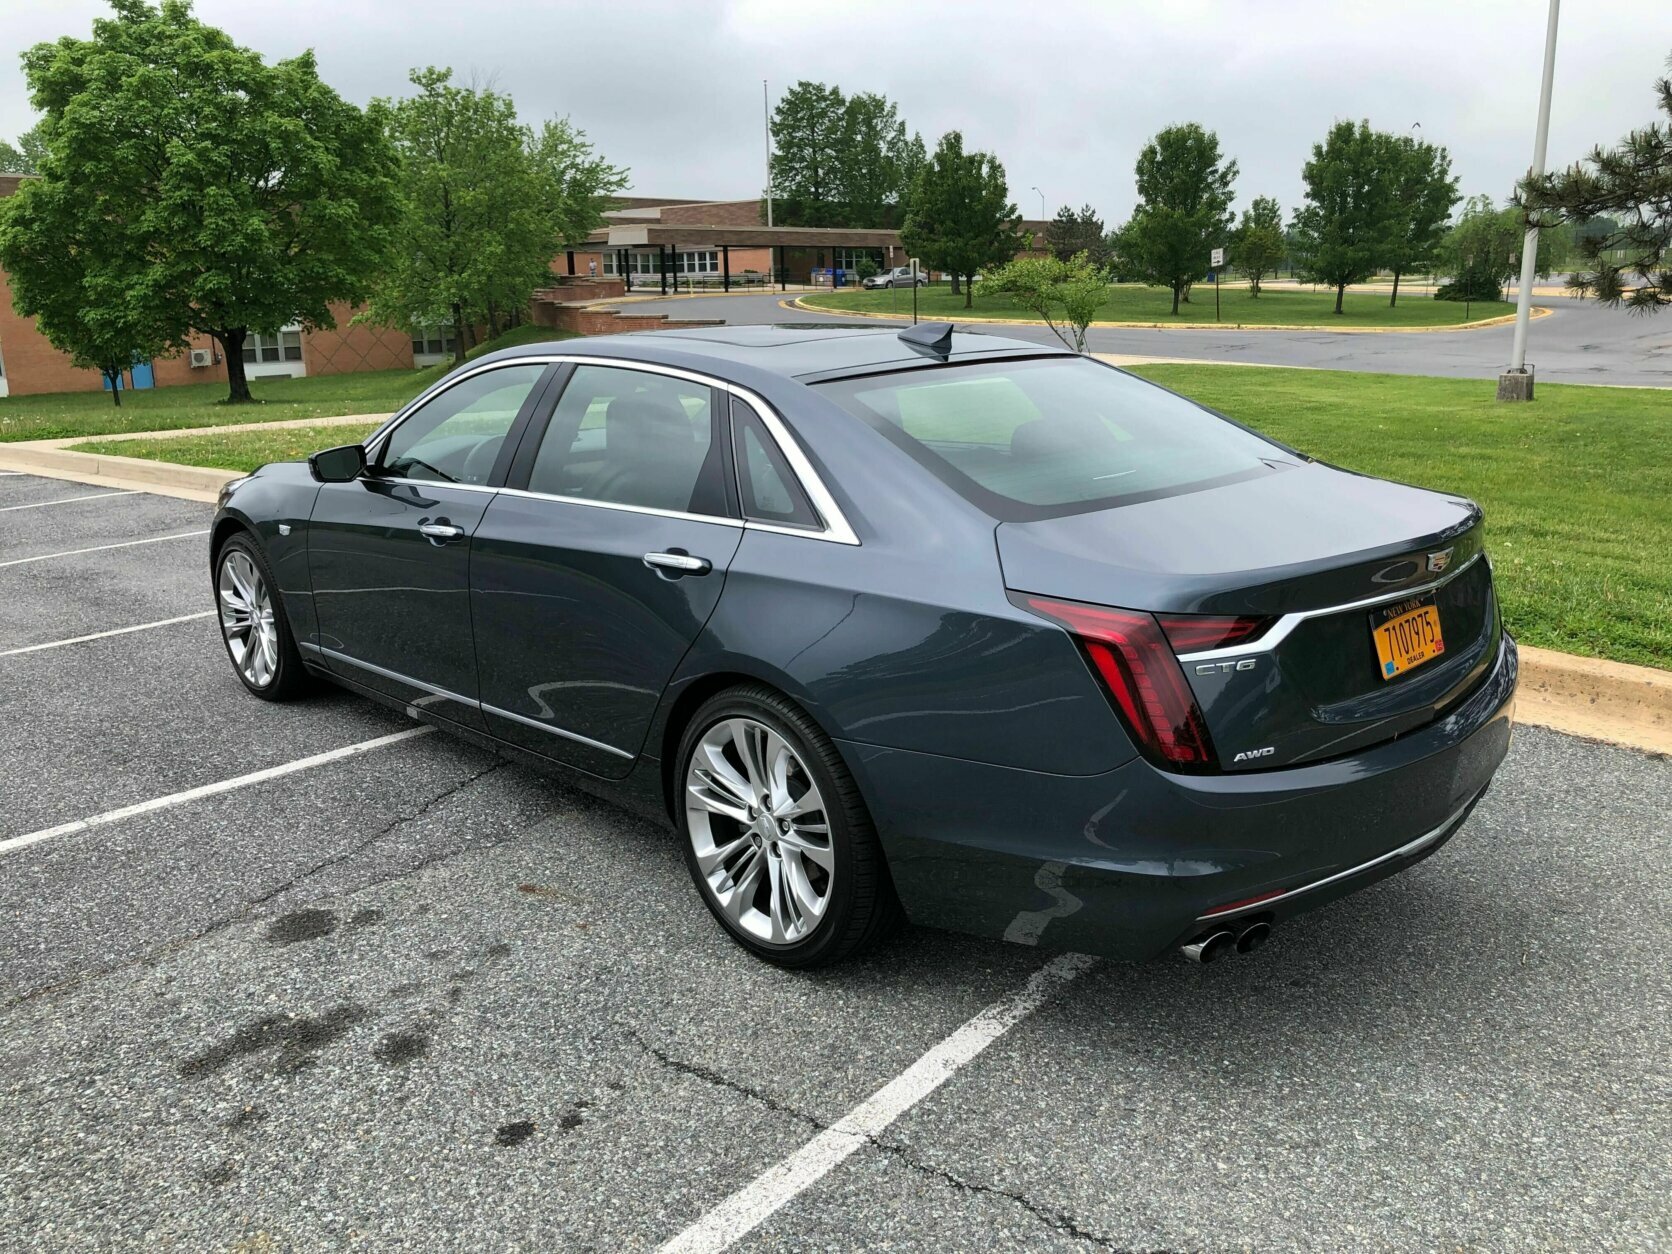 <p>A 34-speaker audio system comes standard with certain models, perfect for rocking out or just relaxing on your journey.</p>
<p>The bad news: The CT6 is now out of production, although new 2020 models remain on dealer lots.</p>
<p>The CT6 starts at $59,990, including delivery, before any discounts.</p>
